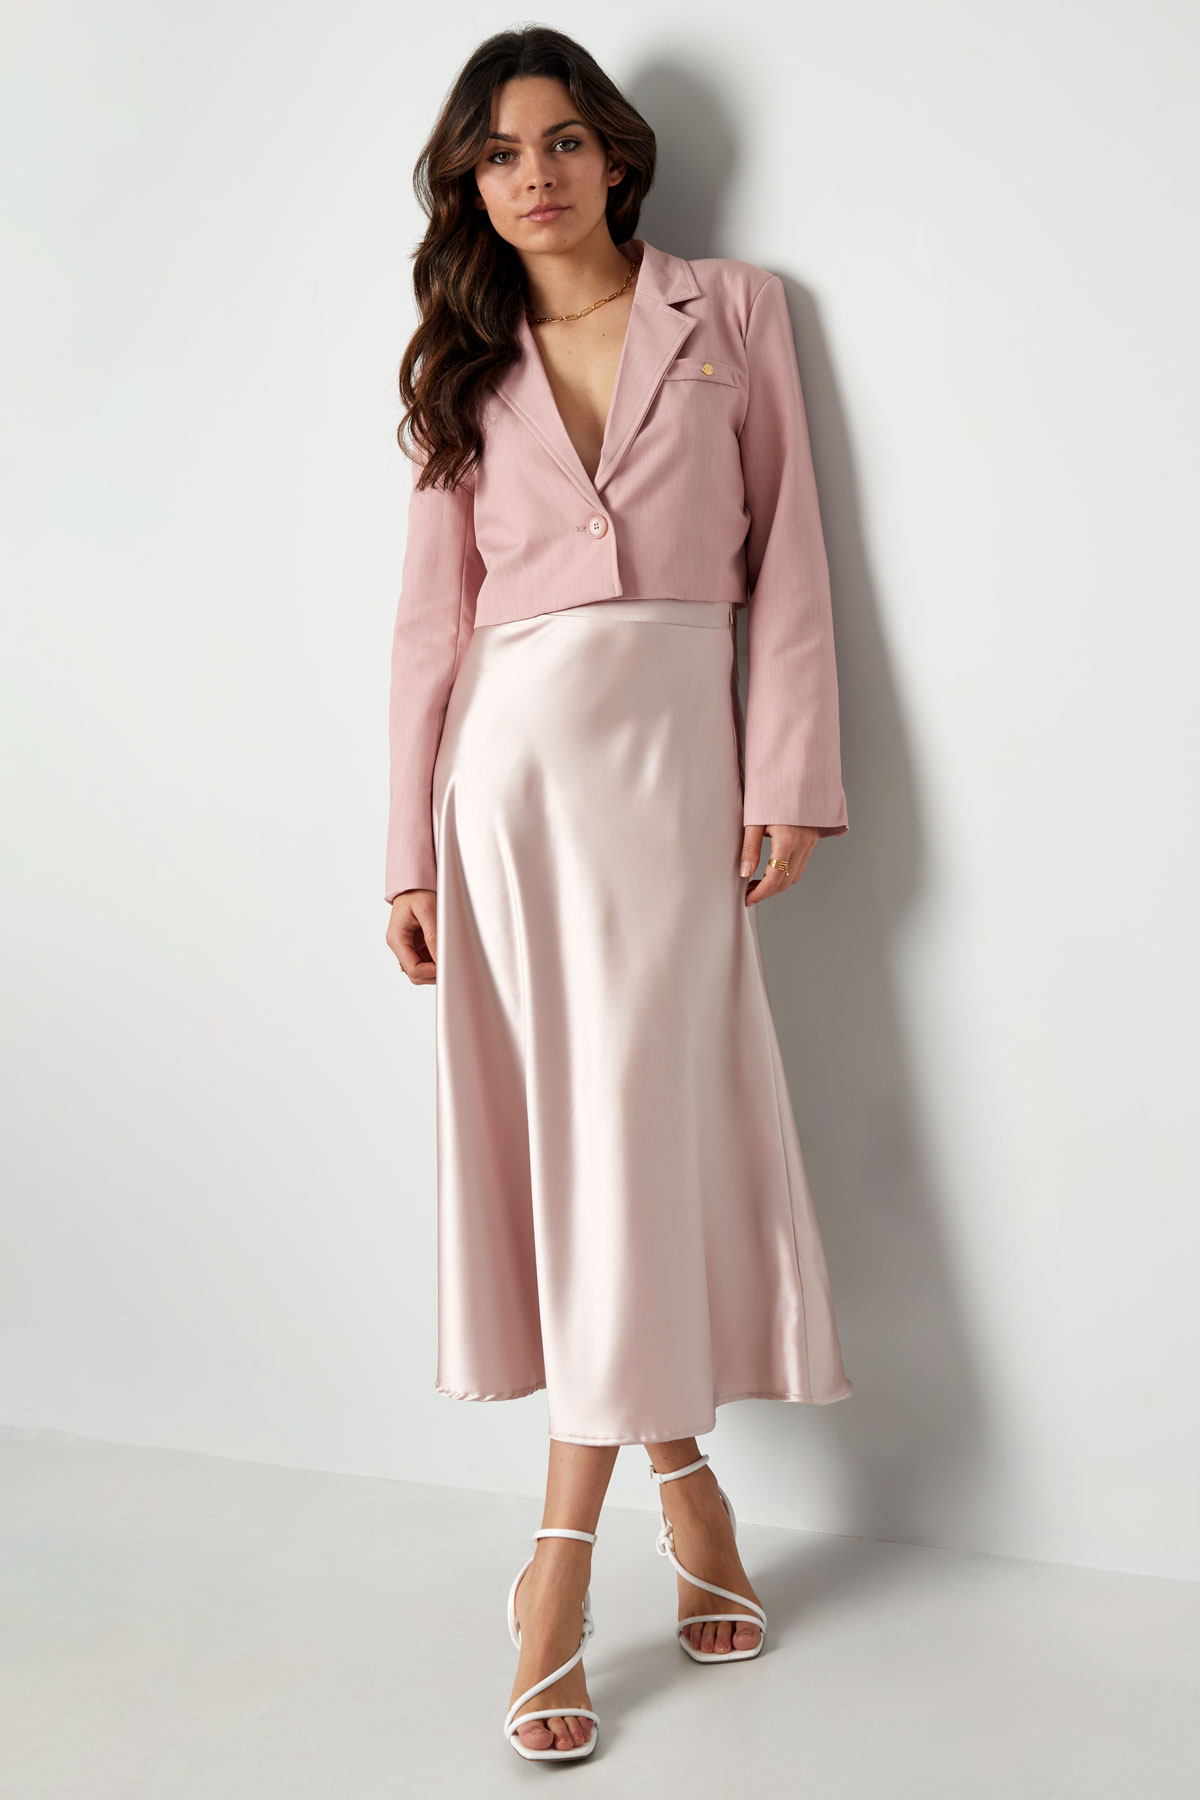 Midi skirt - pink  h5 Picture7